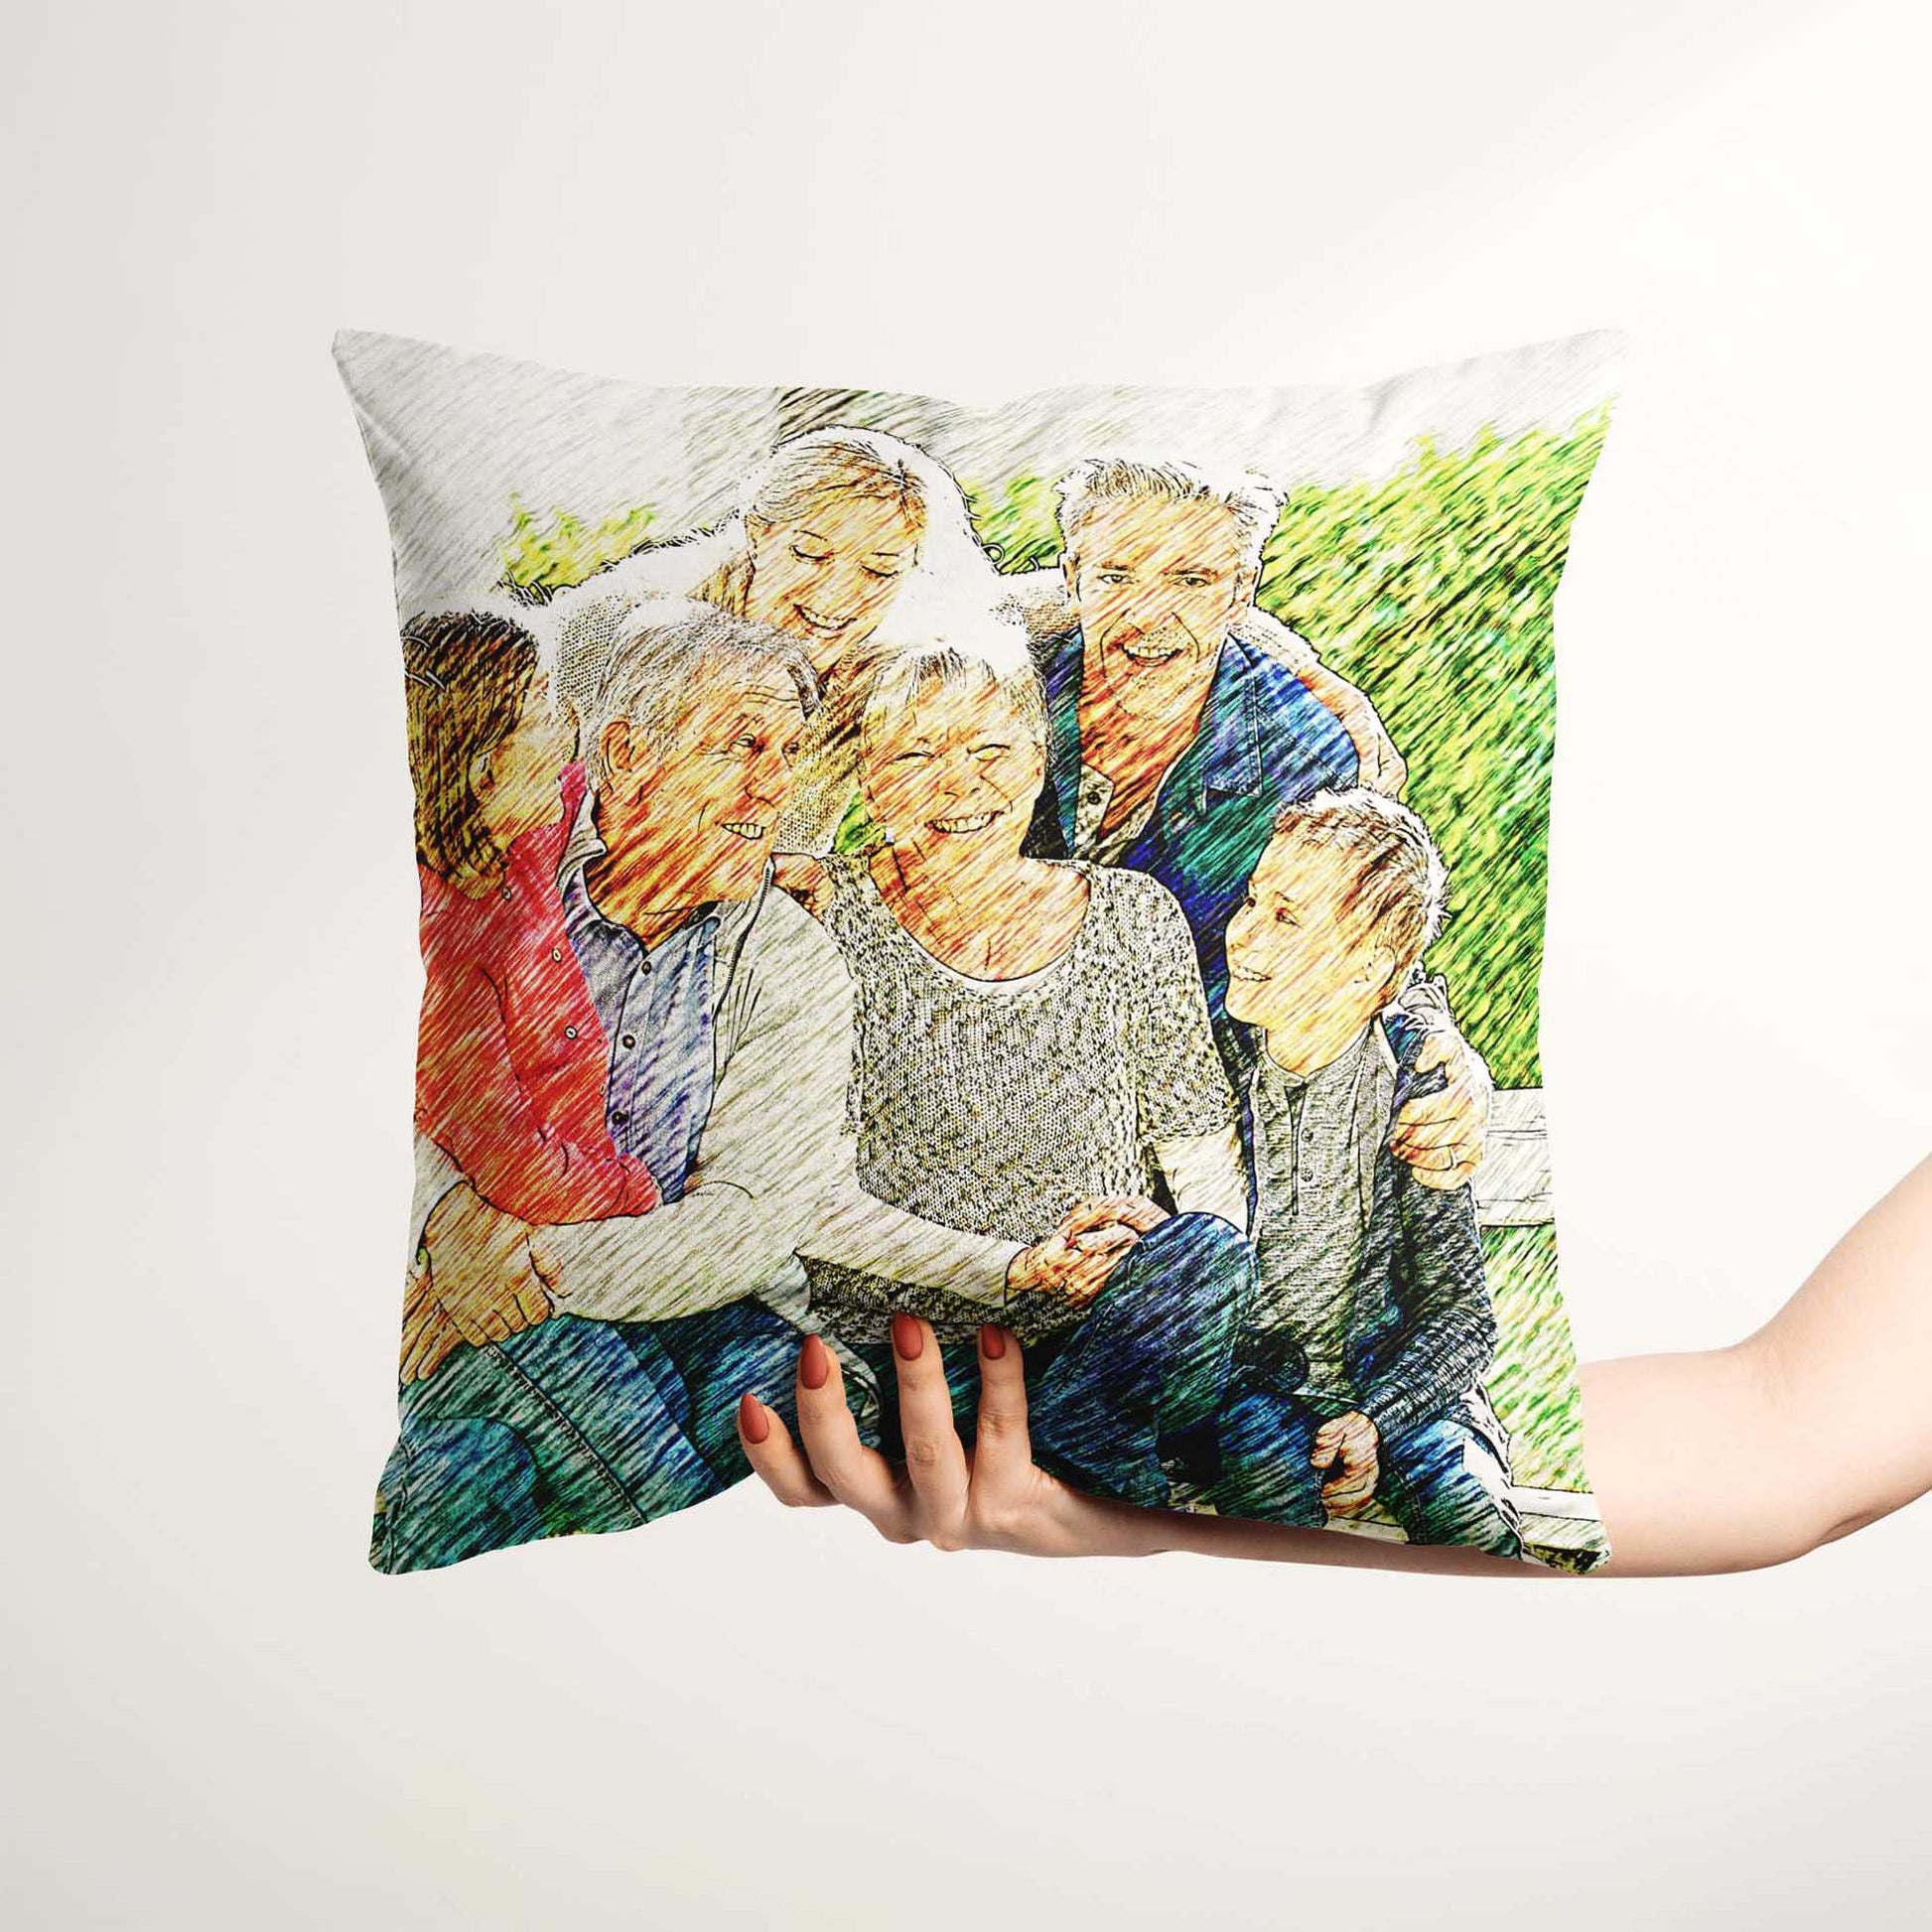 Add a touch of sophistication to your home with our elegant Artsy Illustration Cushion. The luxurious velvet fabric and personalized print create a bespoke piece of art that complements any interior design